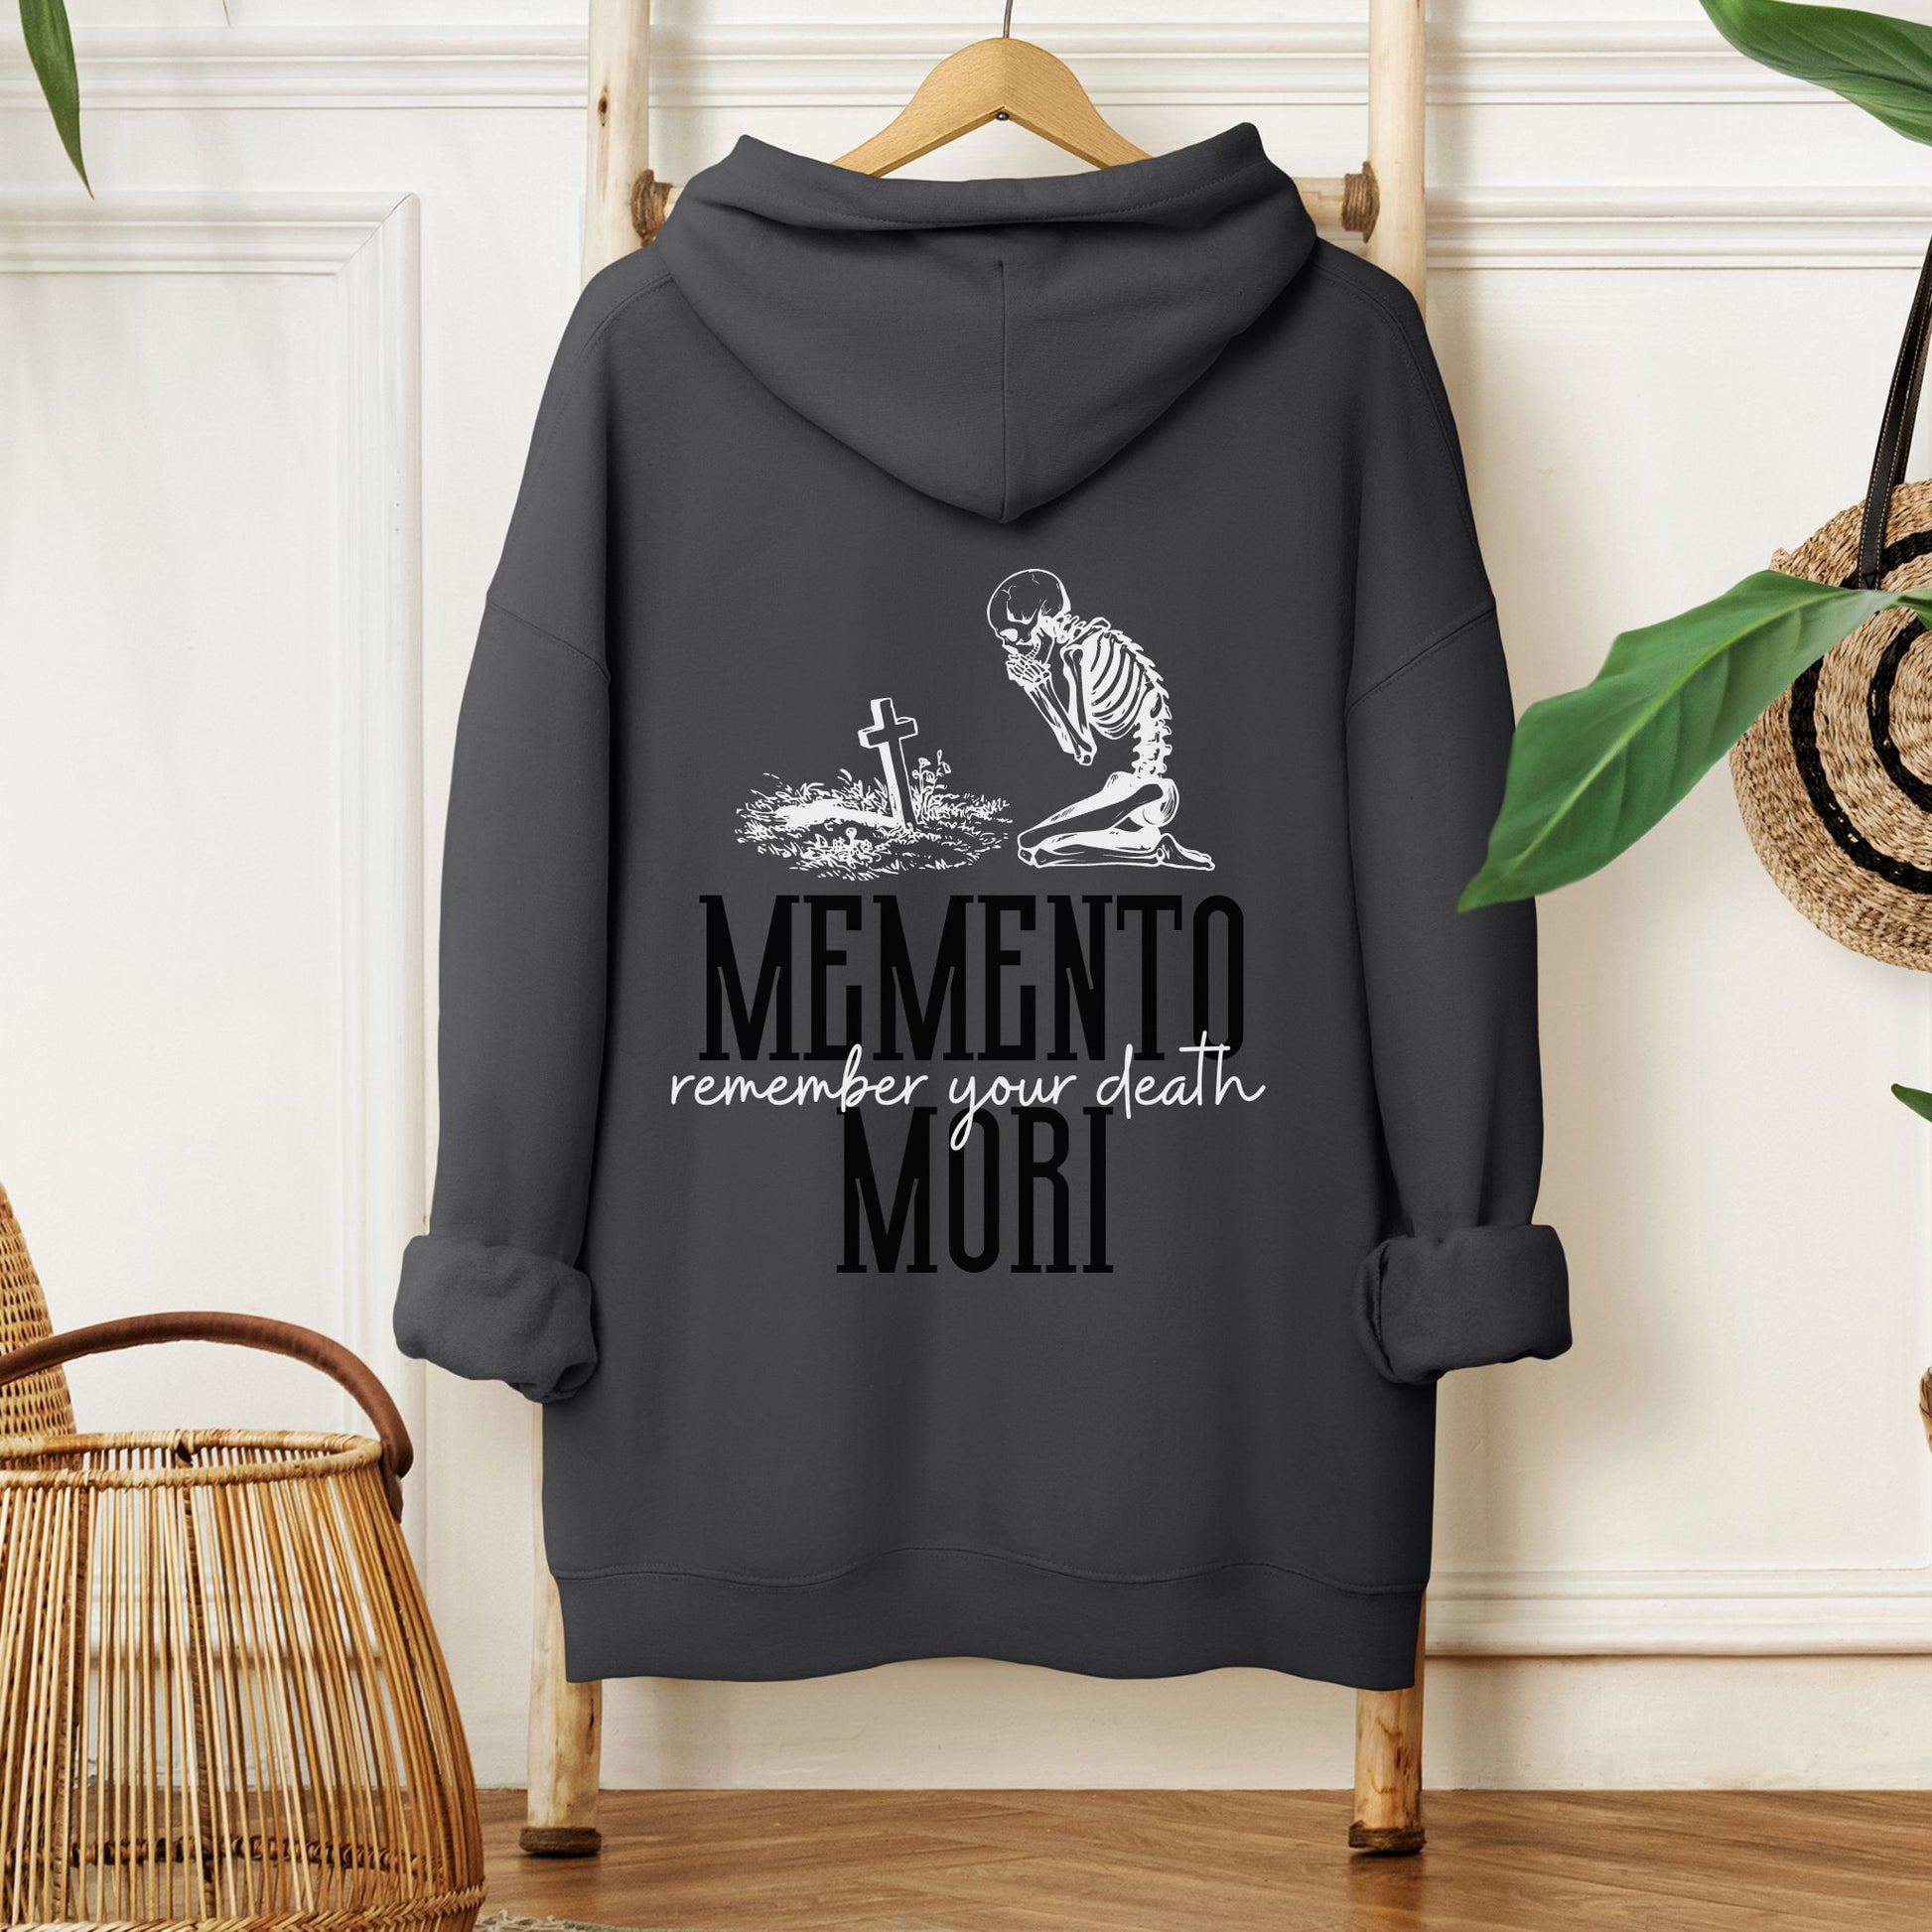 a black hoodie with the words mementoto remembers your death printed on it